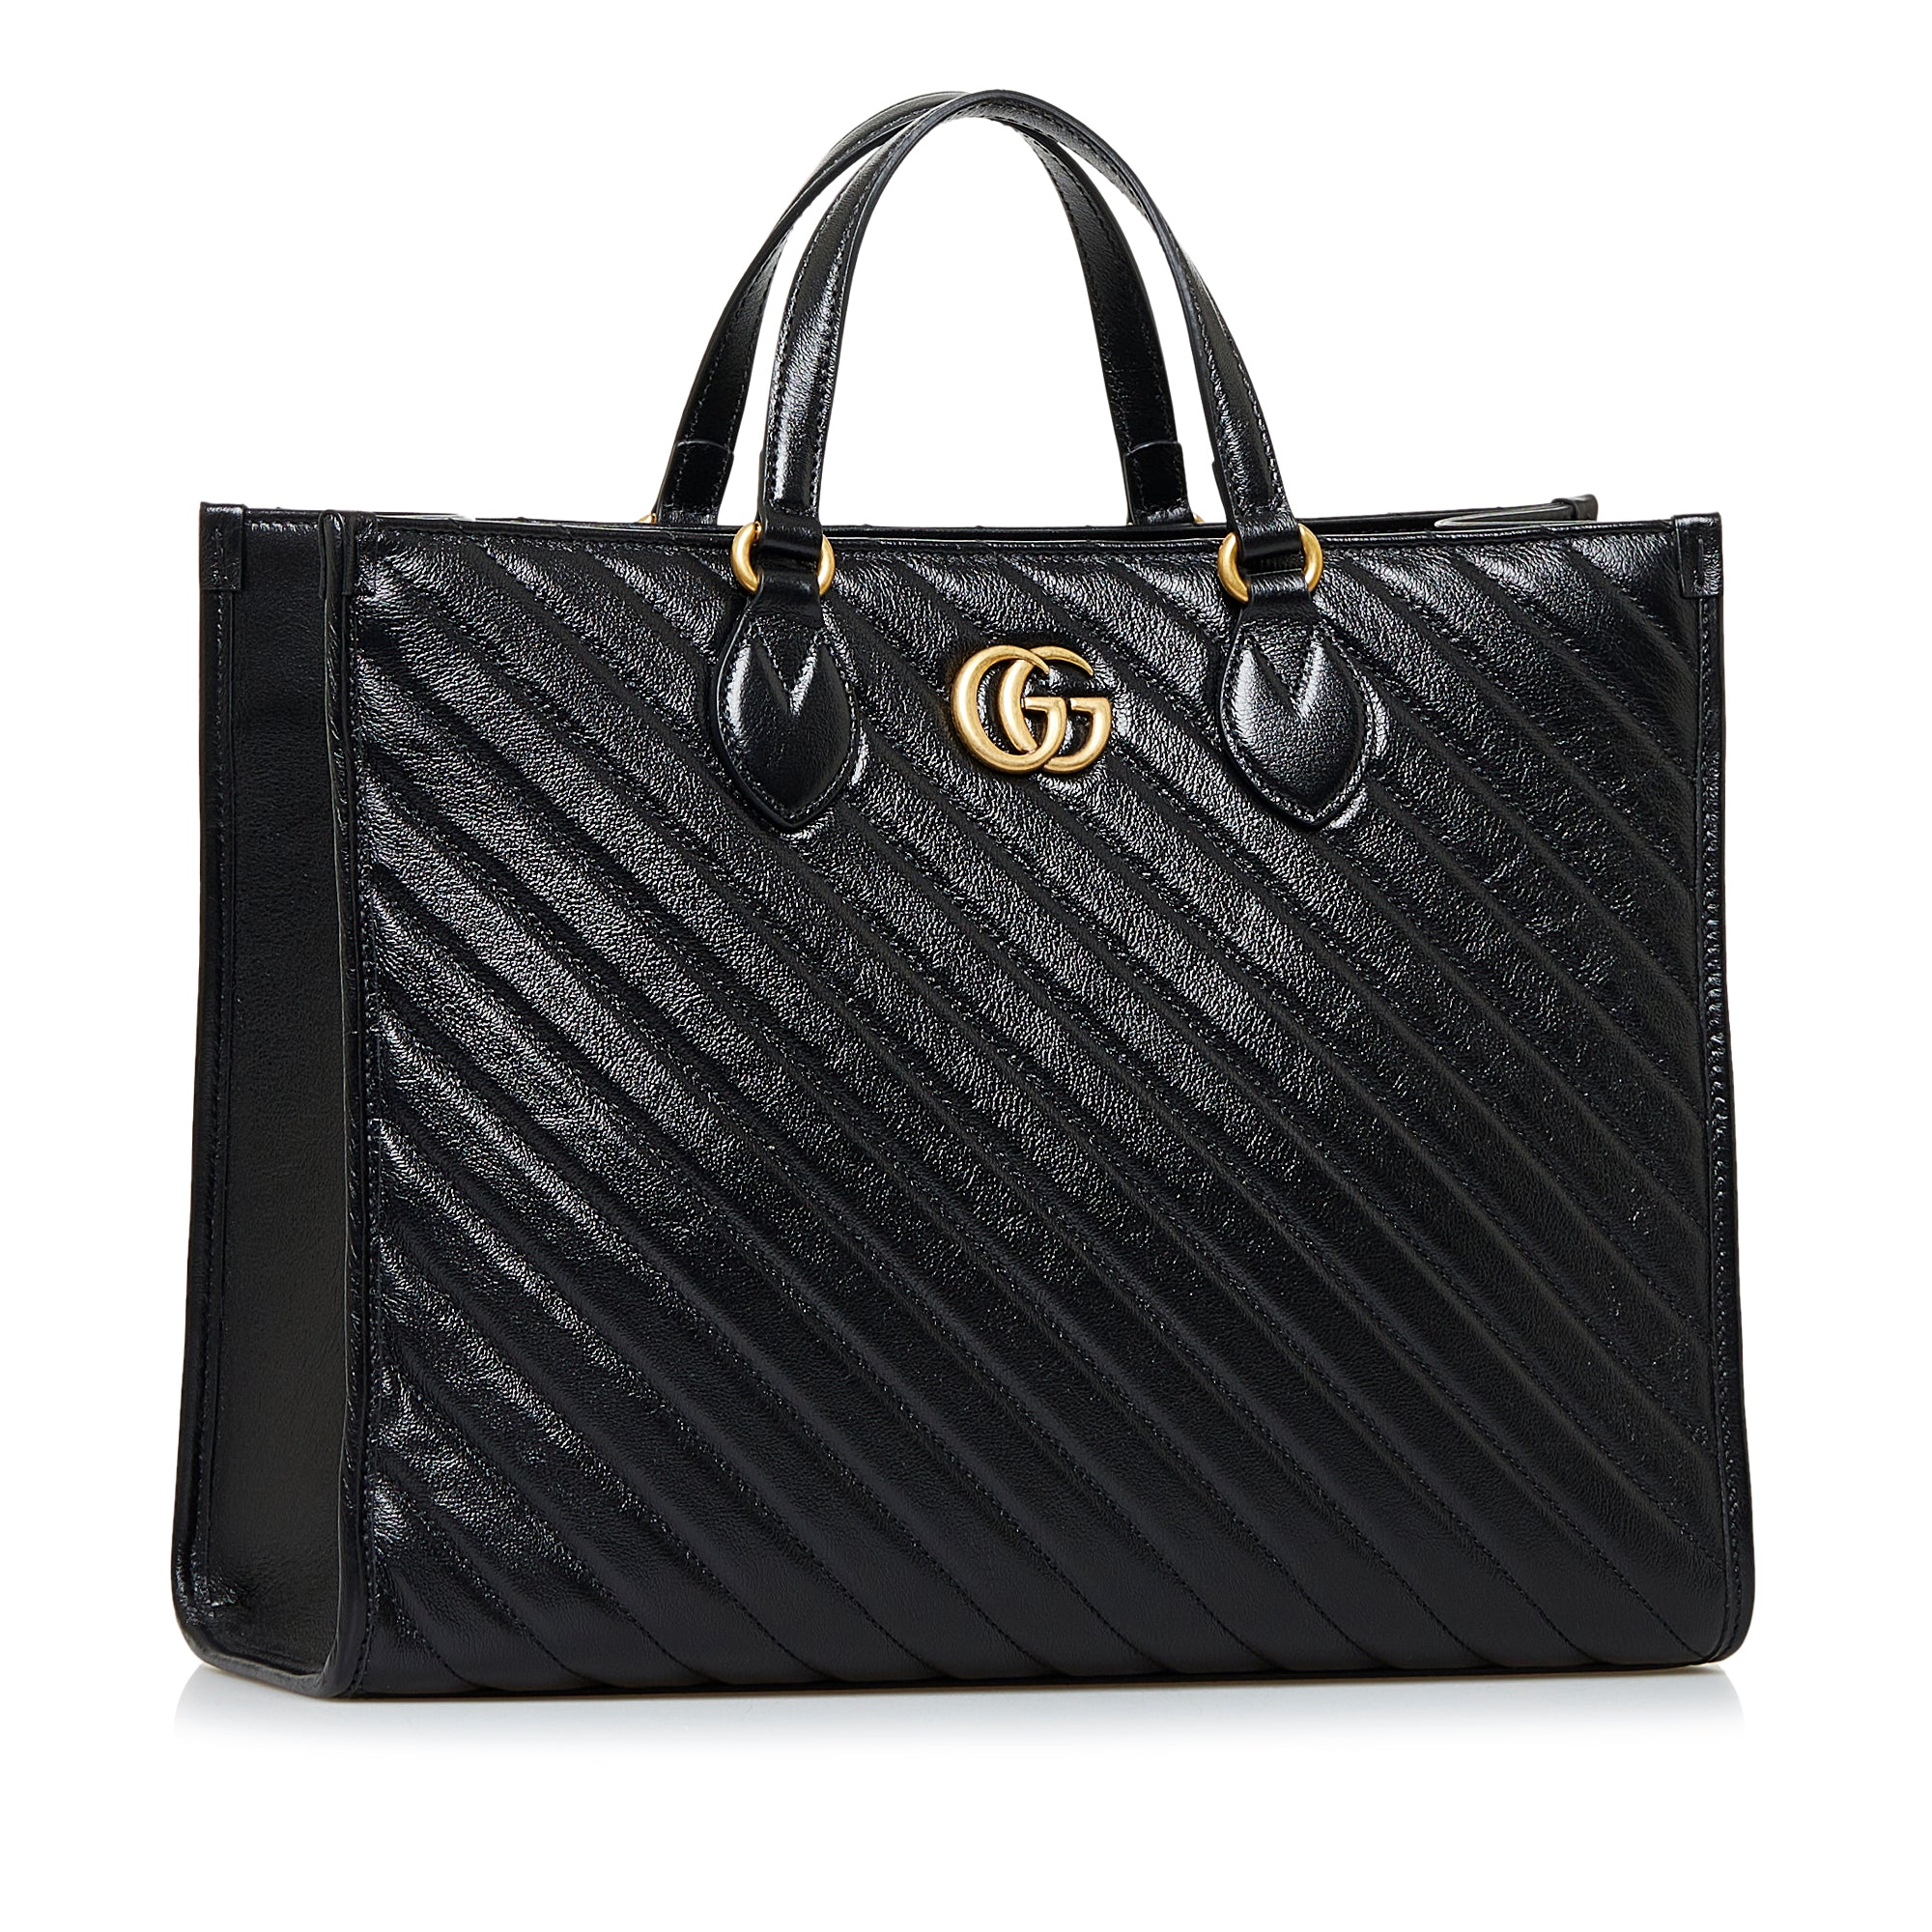 Gucci - Authenticated GG Marmont Handbag - Leather Black Plain for Women, Good Condition